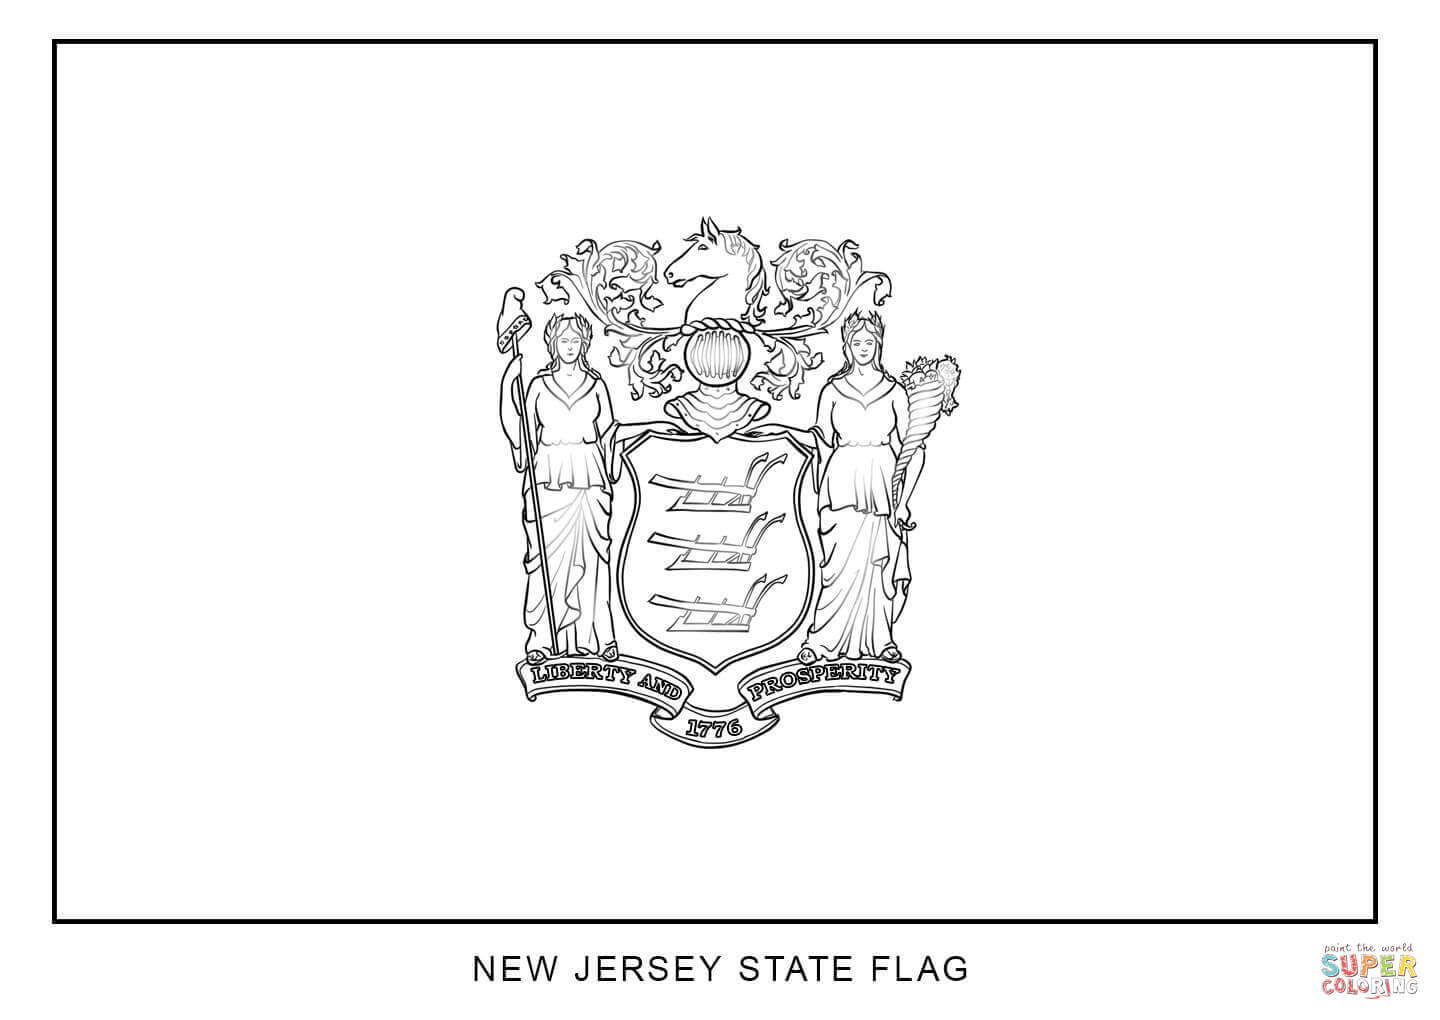 New Jersey flag coloring page